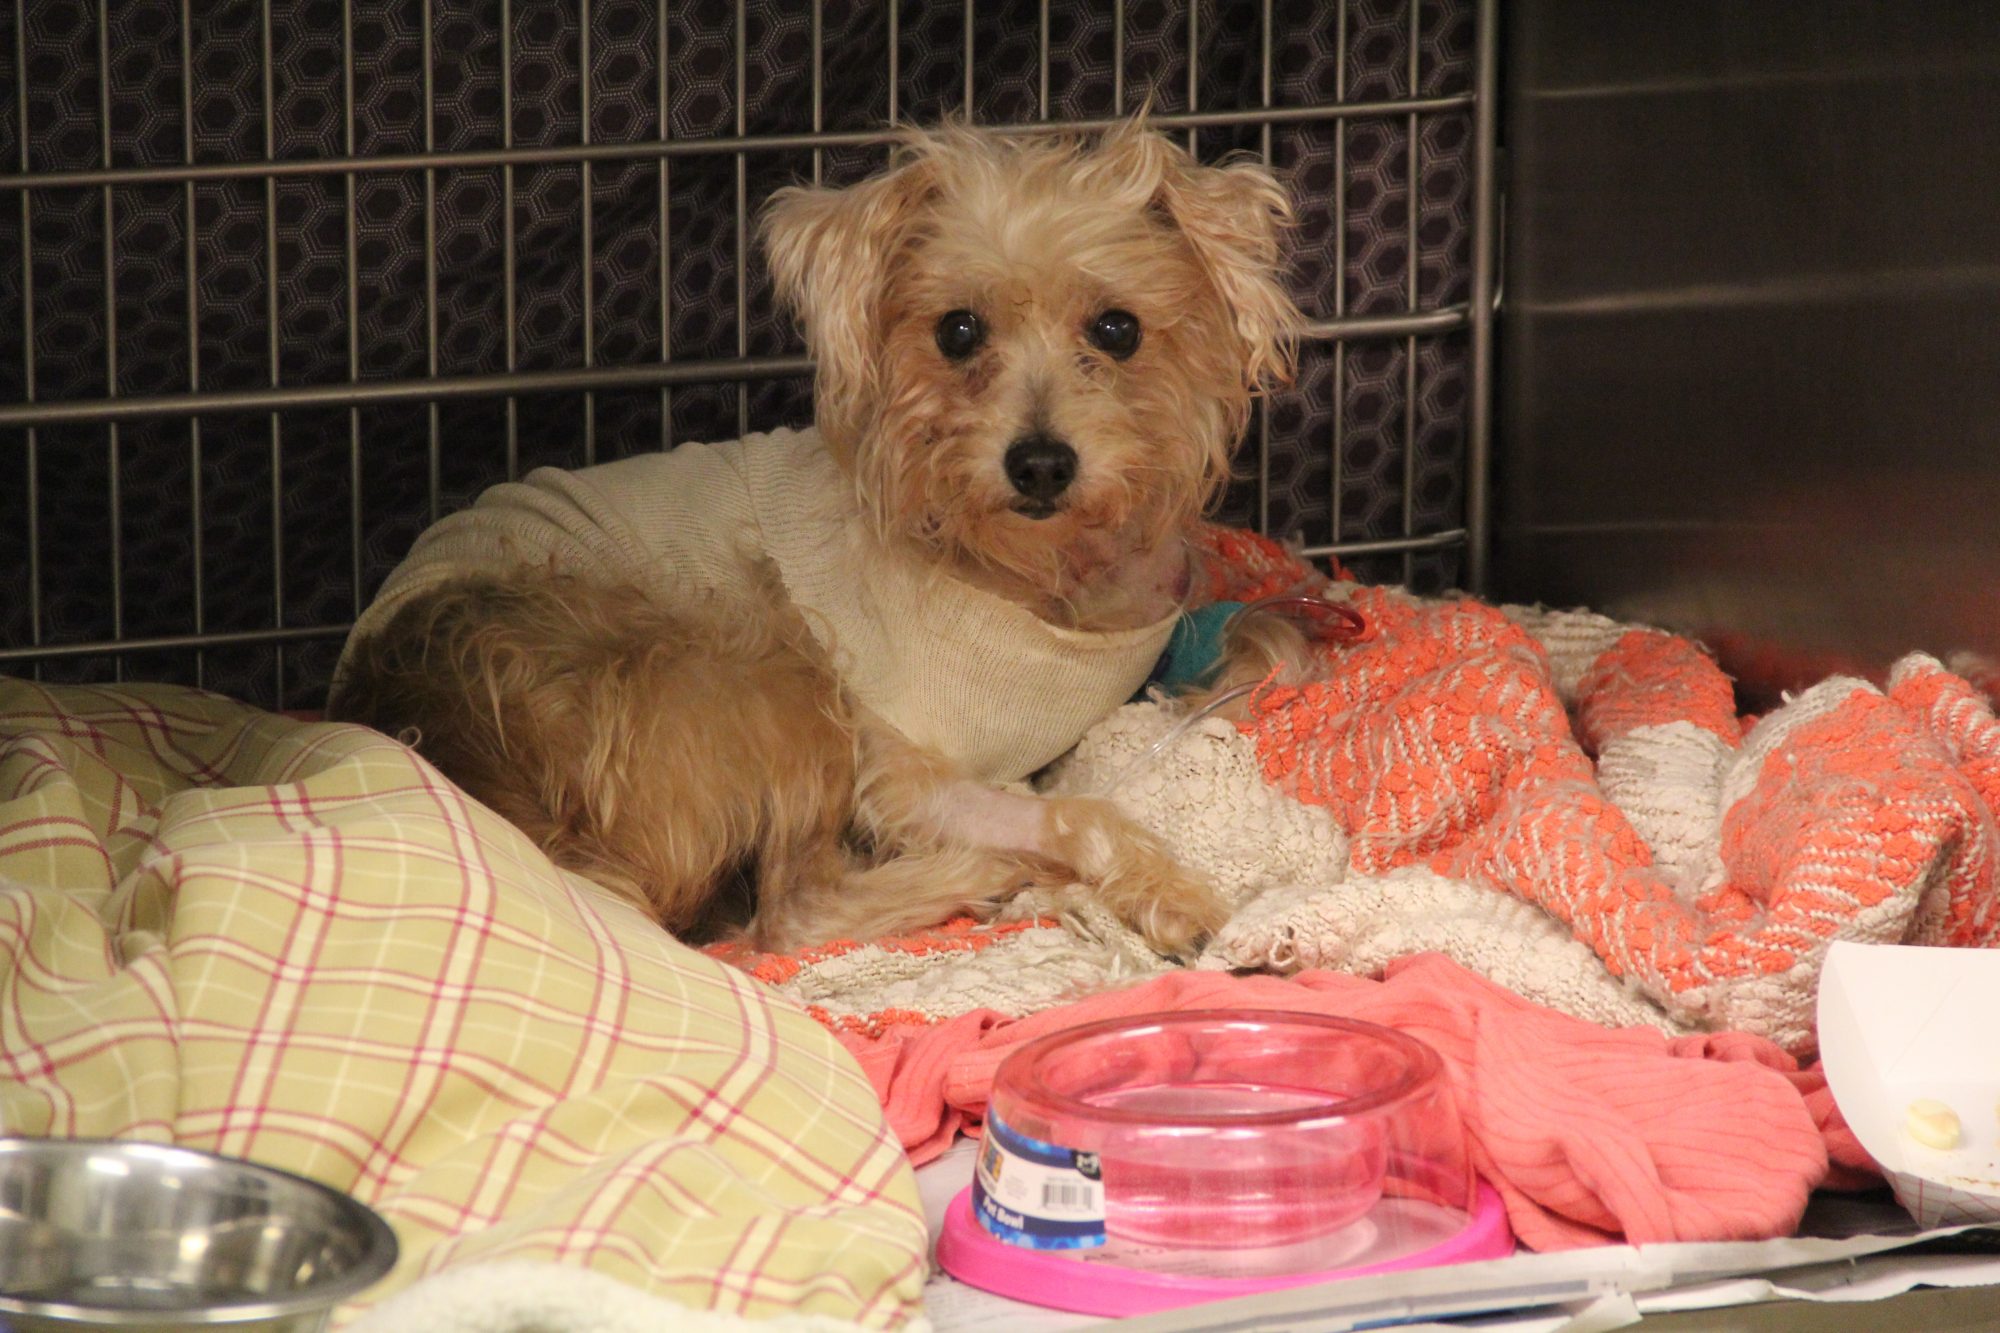 Frannie poodle mix recovering from stabbing